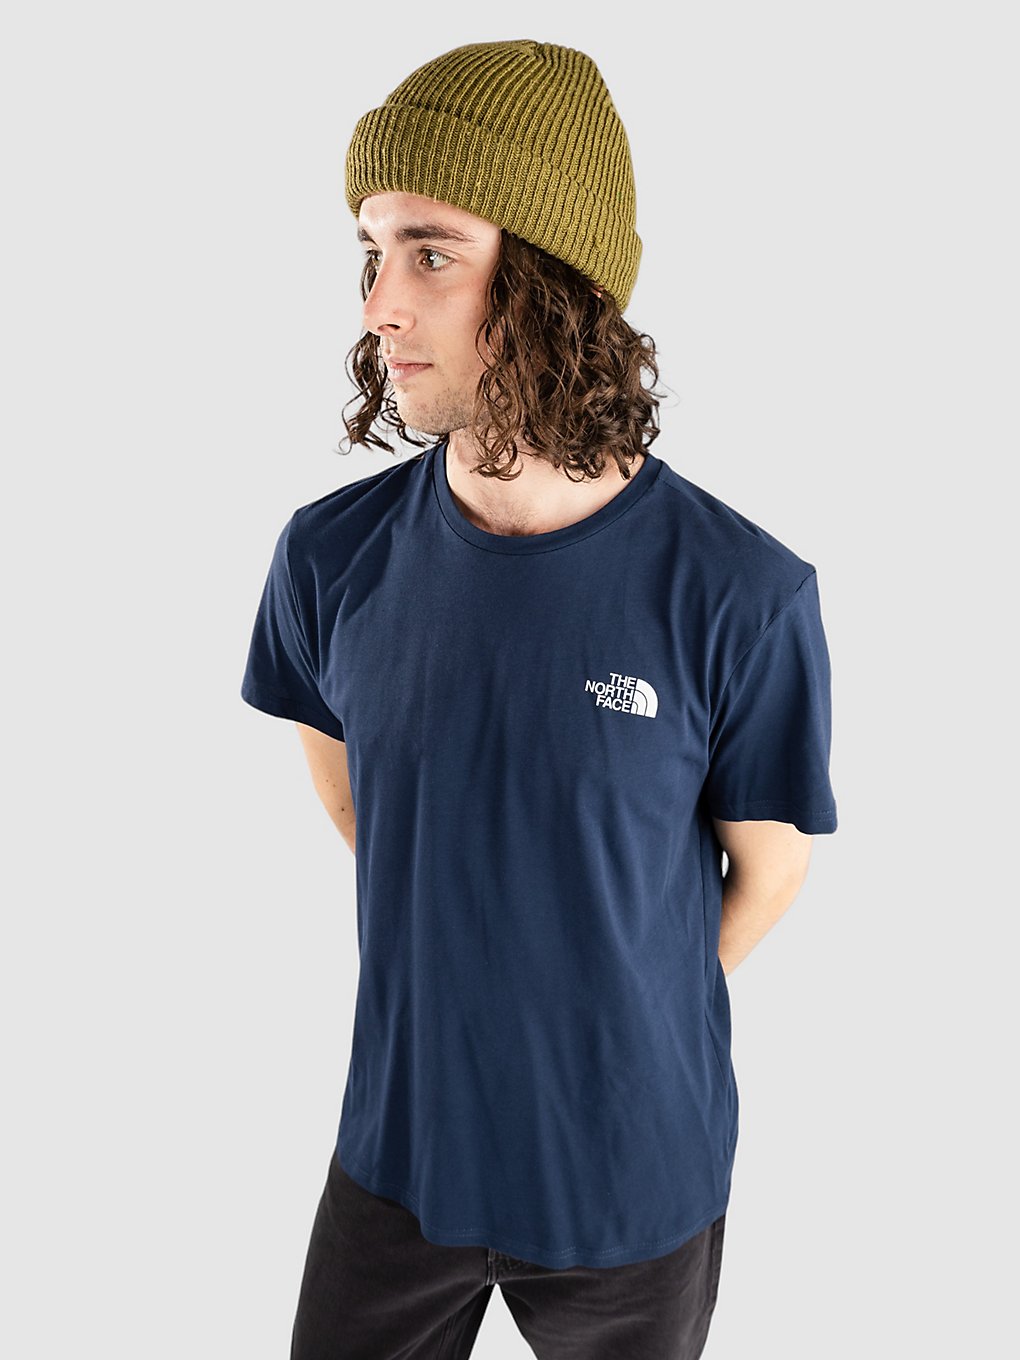 THE NORTH FACE Simple Dome T-Shirt summit navy kaufen